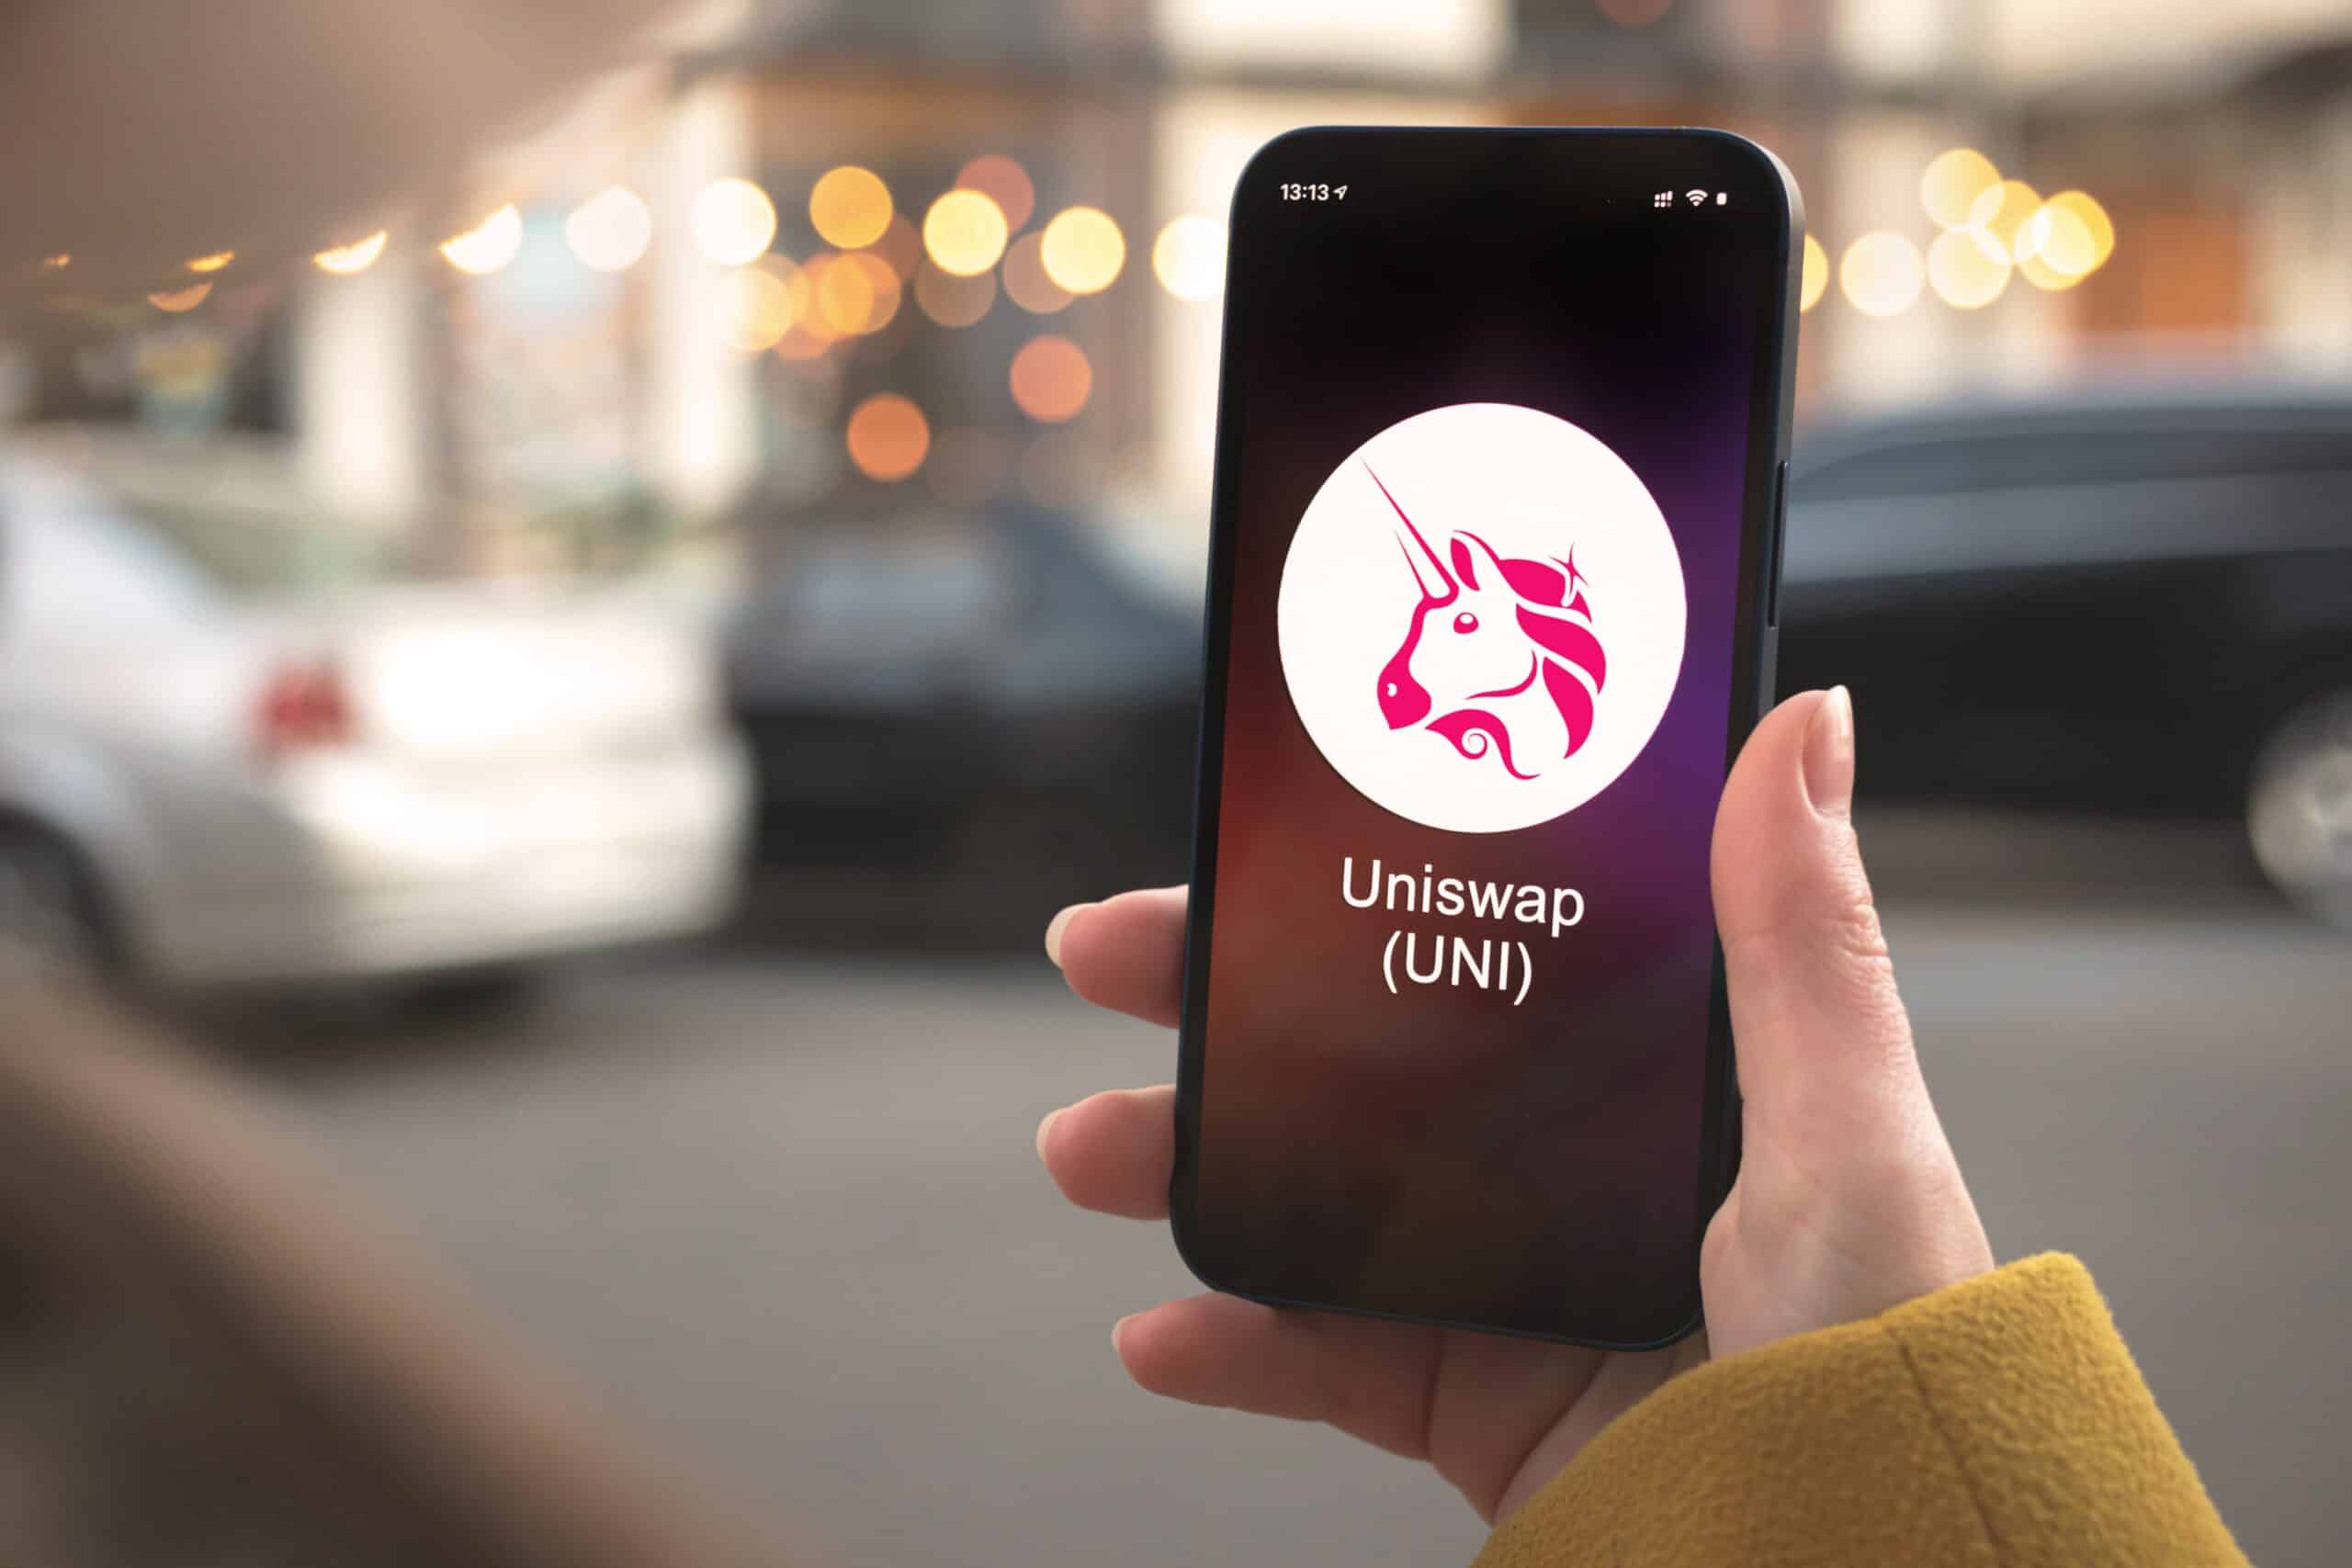 Uniswap's logo of a pink unicorn is displayed on a phone in a person's hand